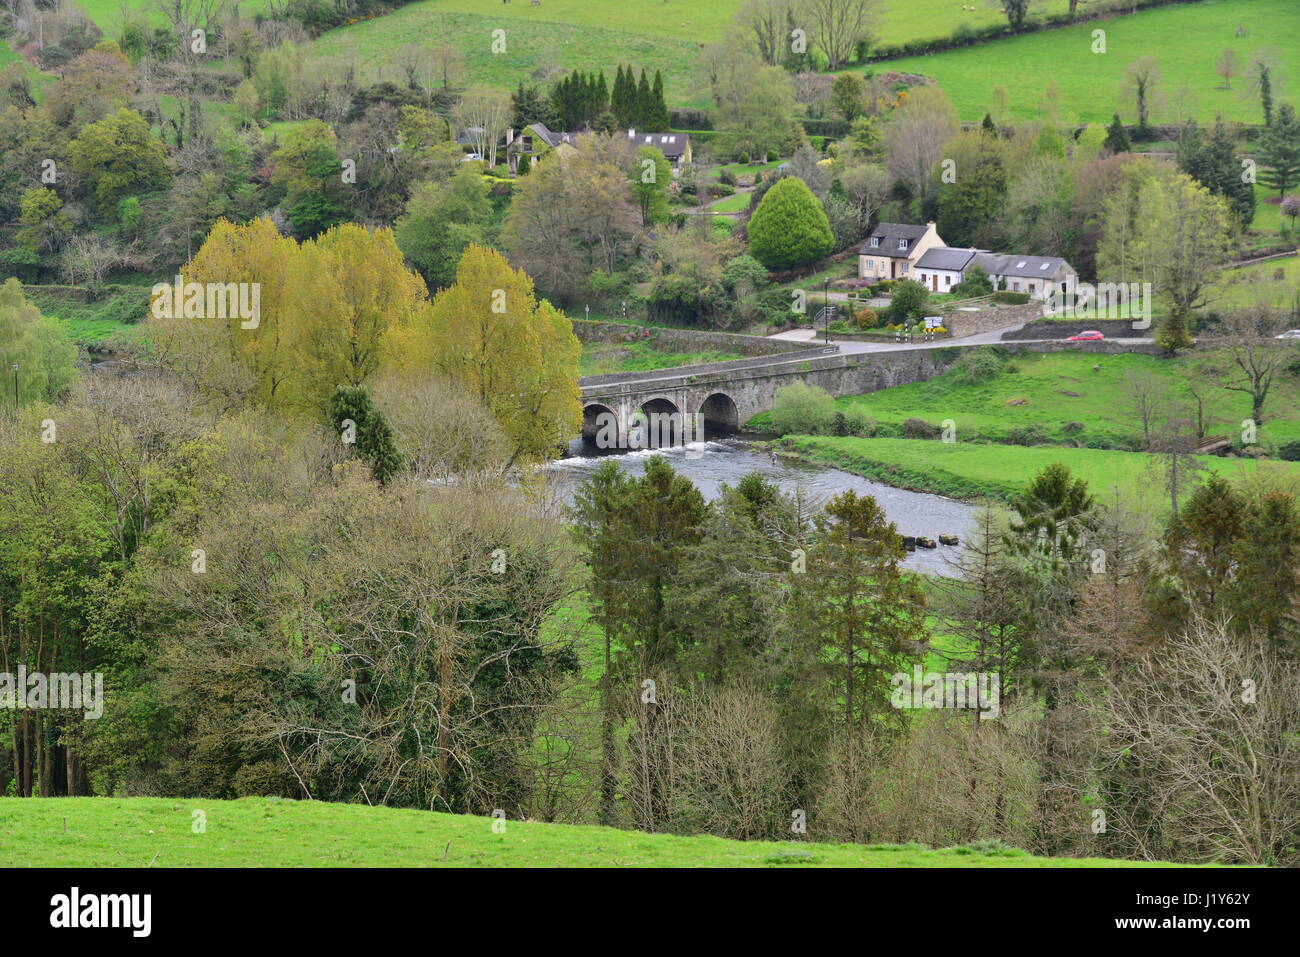 Looking down at the bridge at Inistioge, Ireland on a spring day. Stock Photo